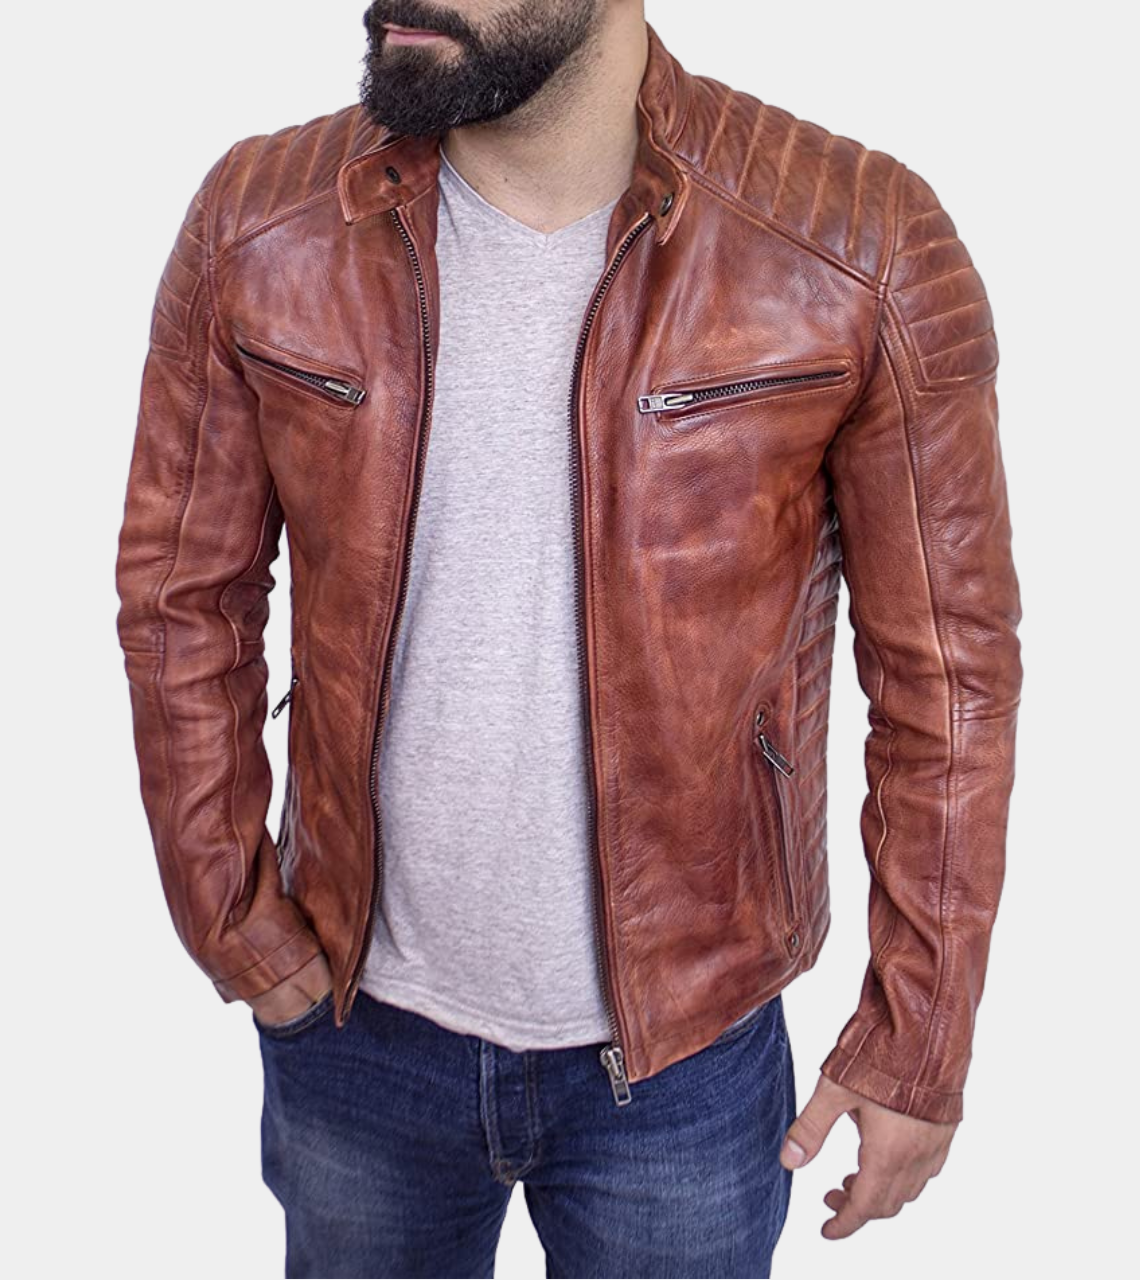  Quilted Men's Leather Jacket 